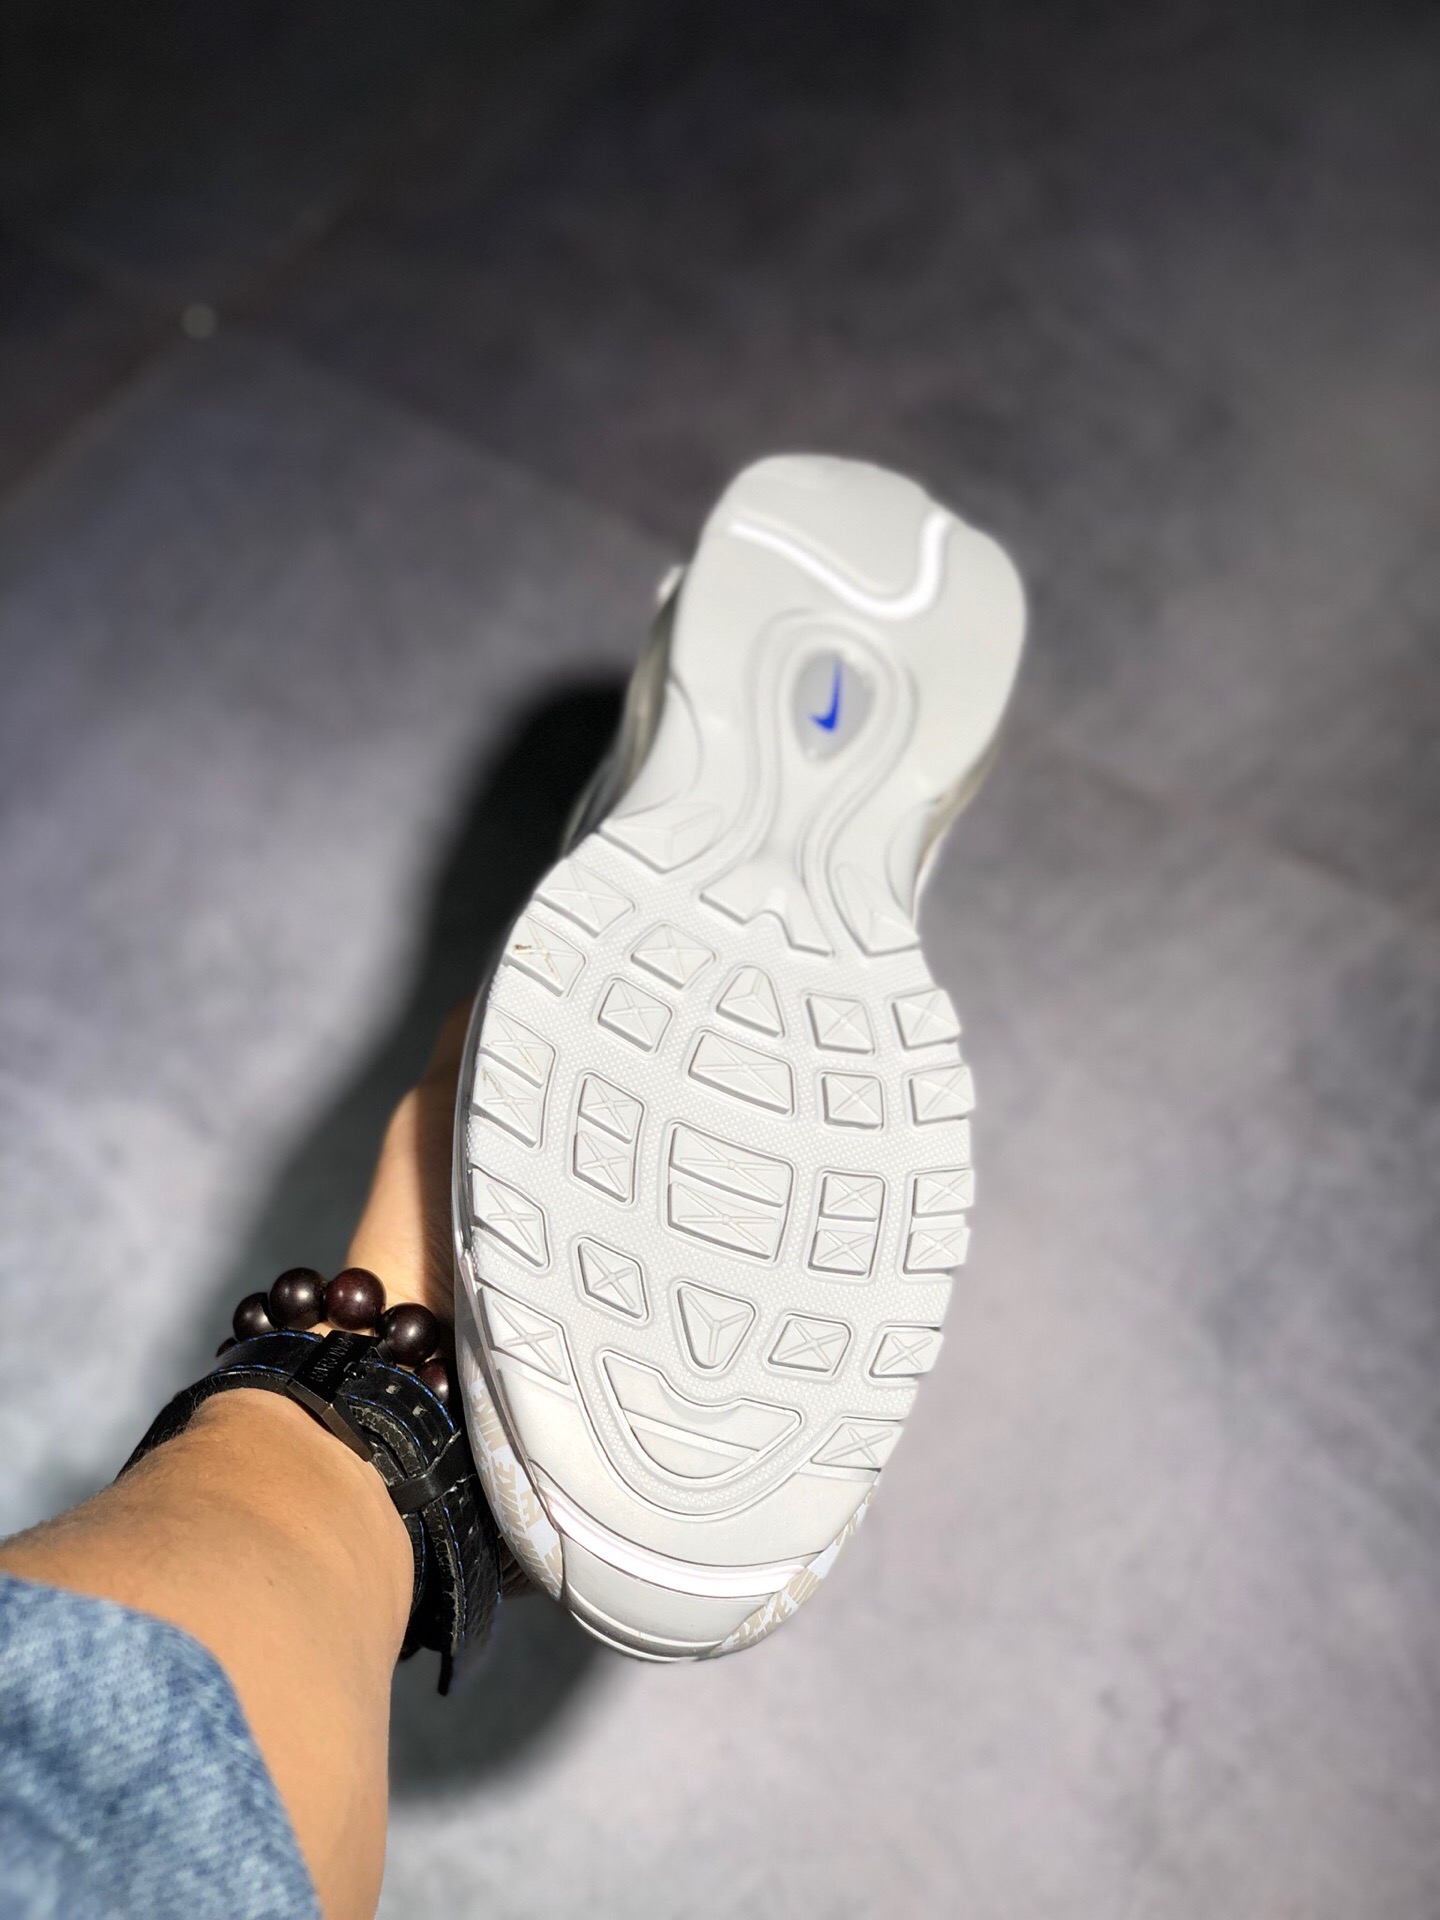 Authentic Nike Air Max 97 3M Silver